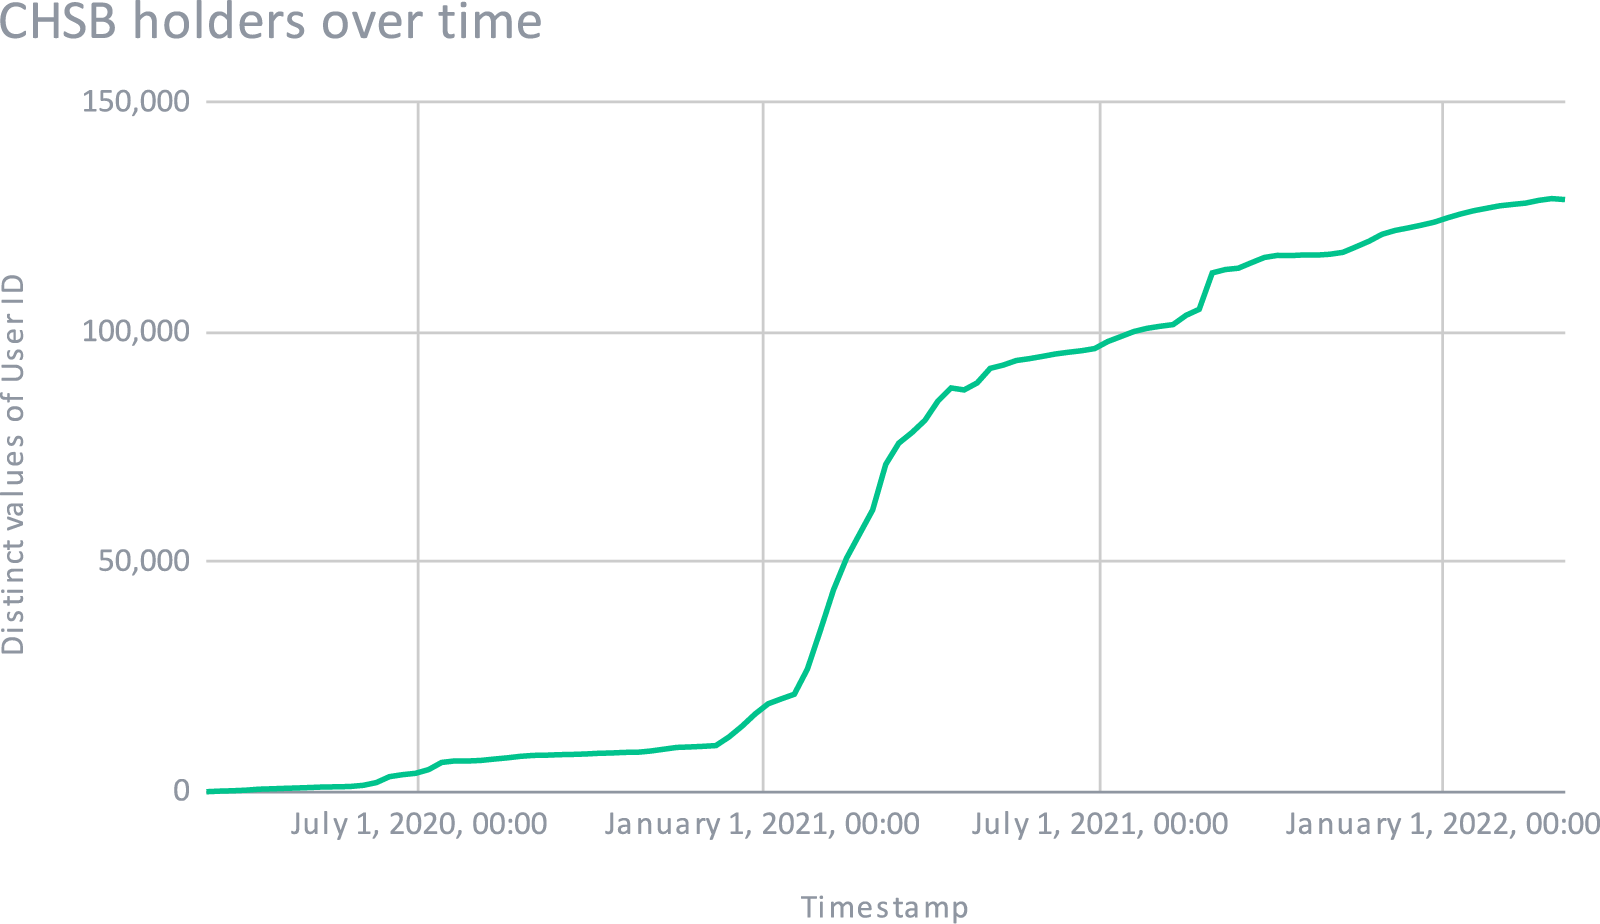 CHSB holders over time